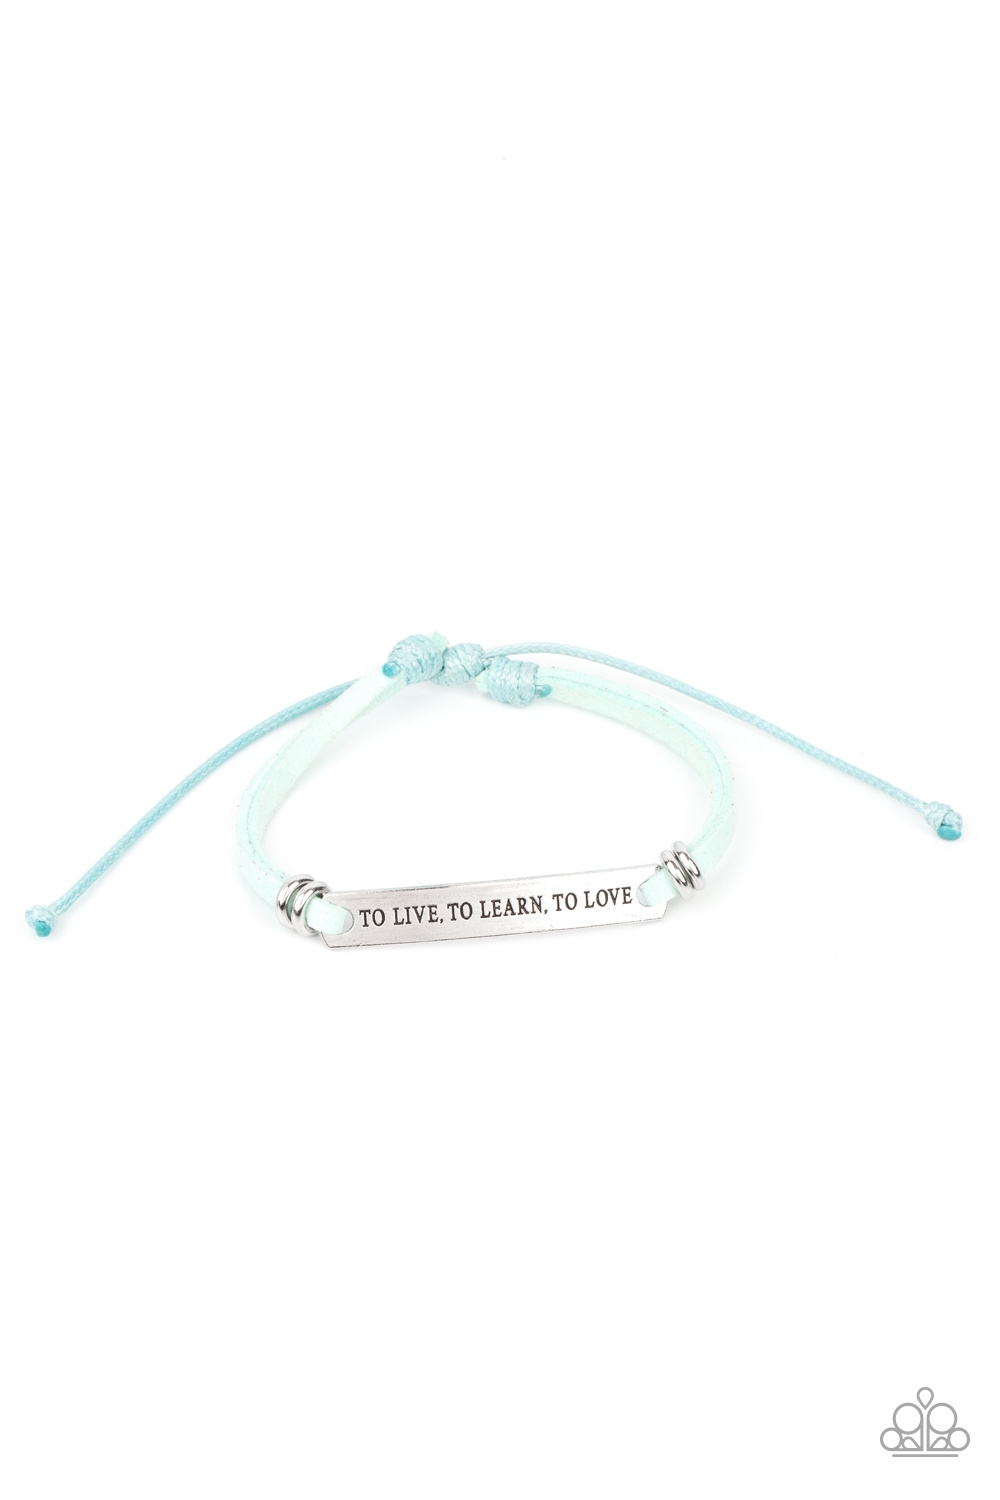 Bracelet - To Live, To Learn, To Love - Blue